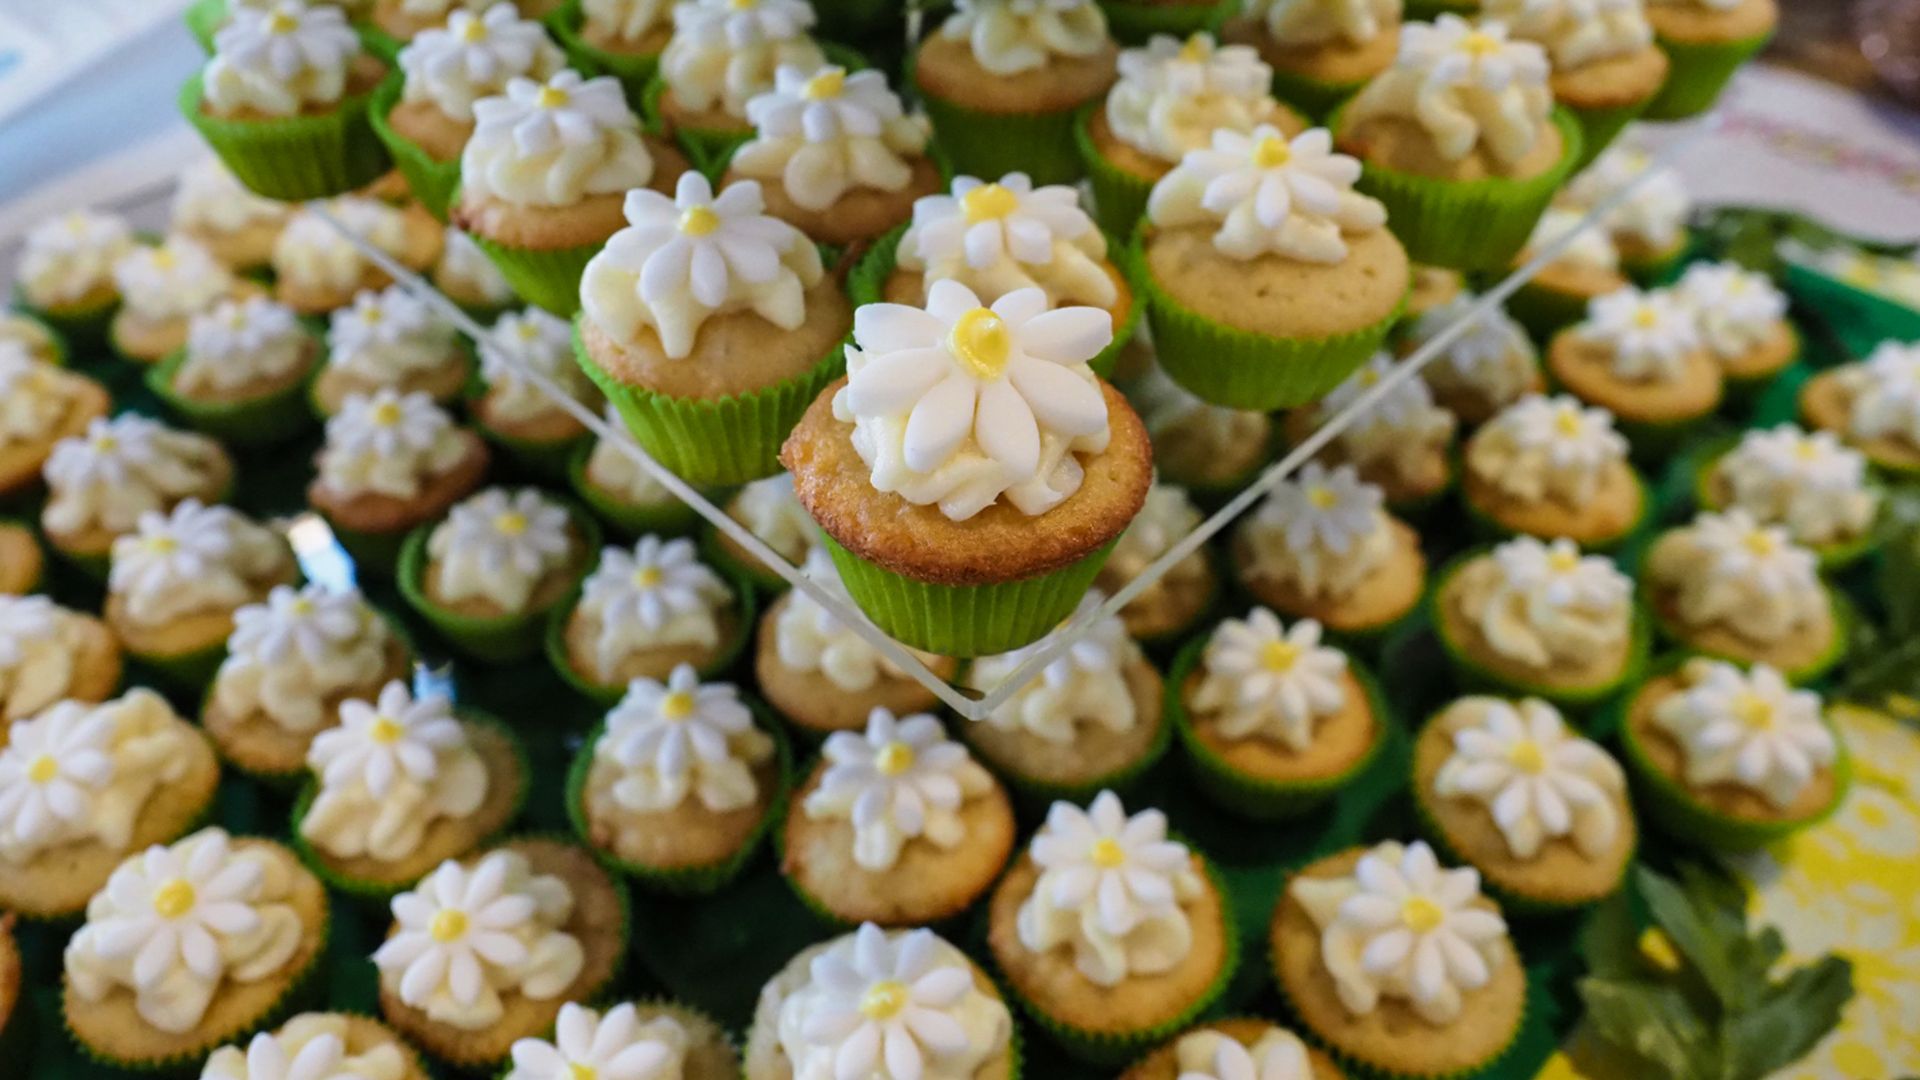 A cupcake display at the Annual Great Cupcake Contest. The cupcakes are in green wrapping and have white and yellow flowers made out of icing on top.